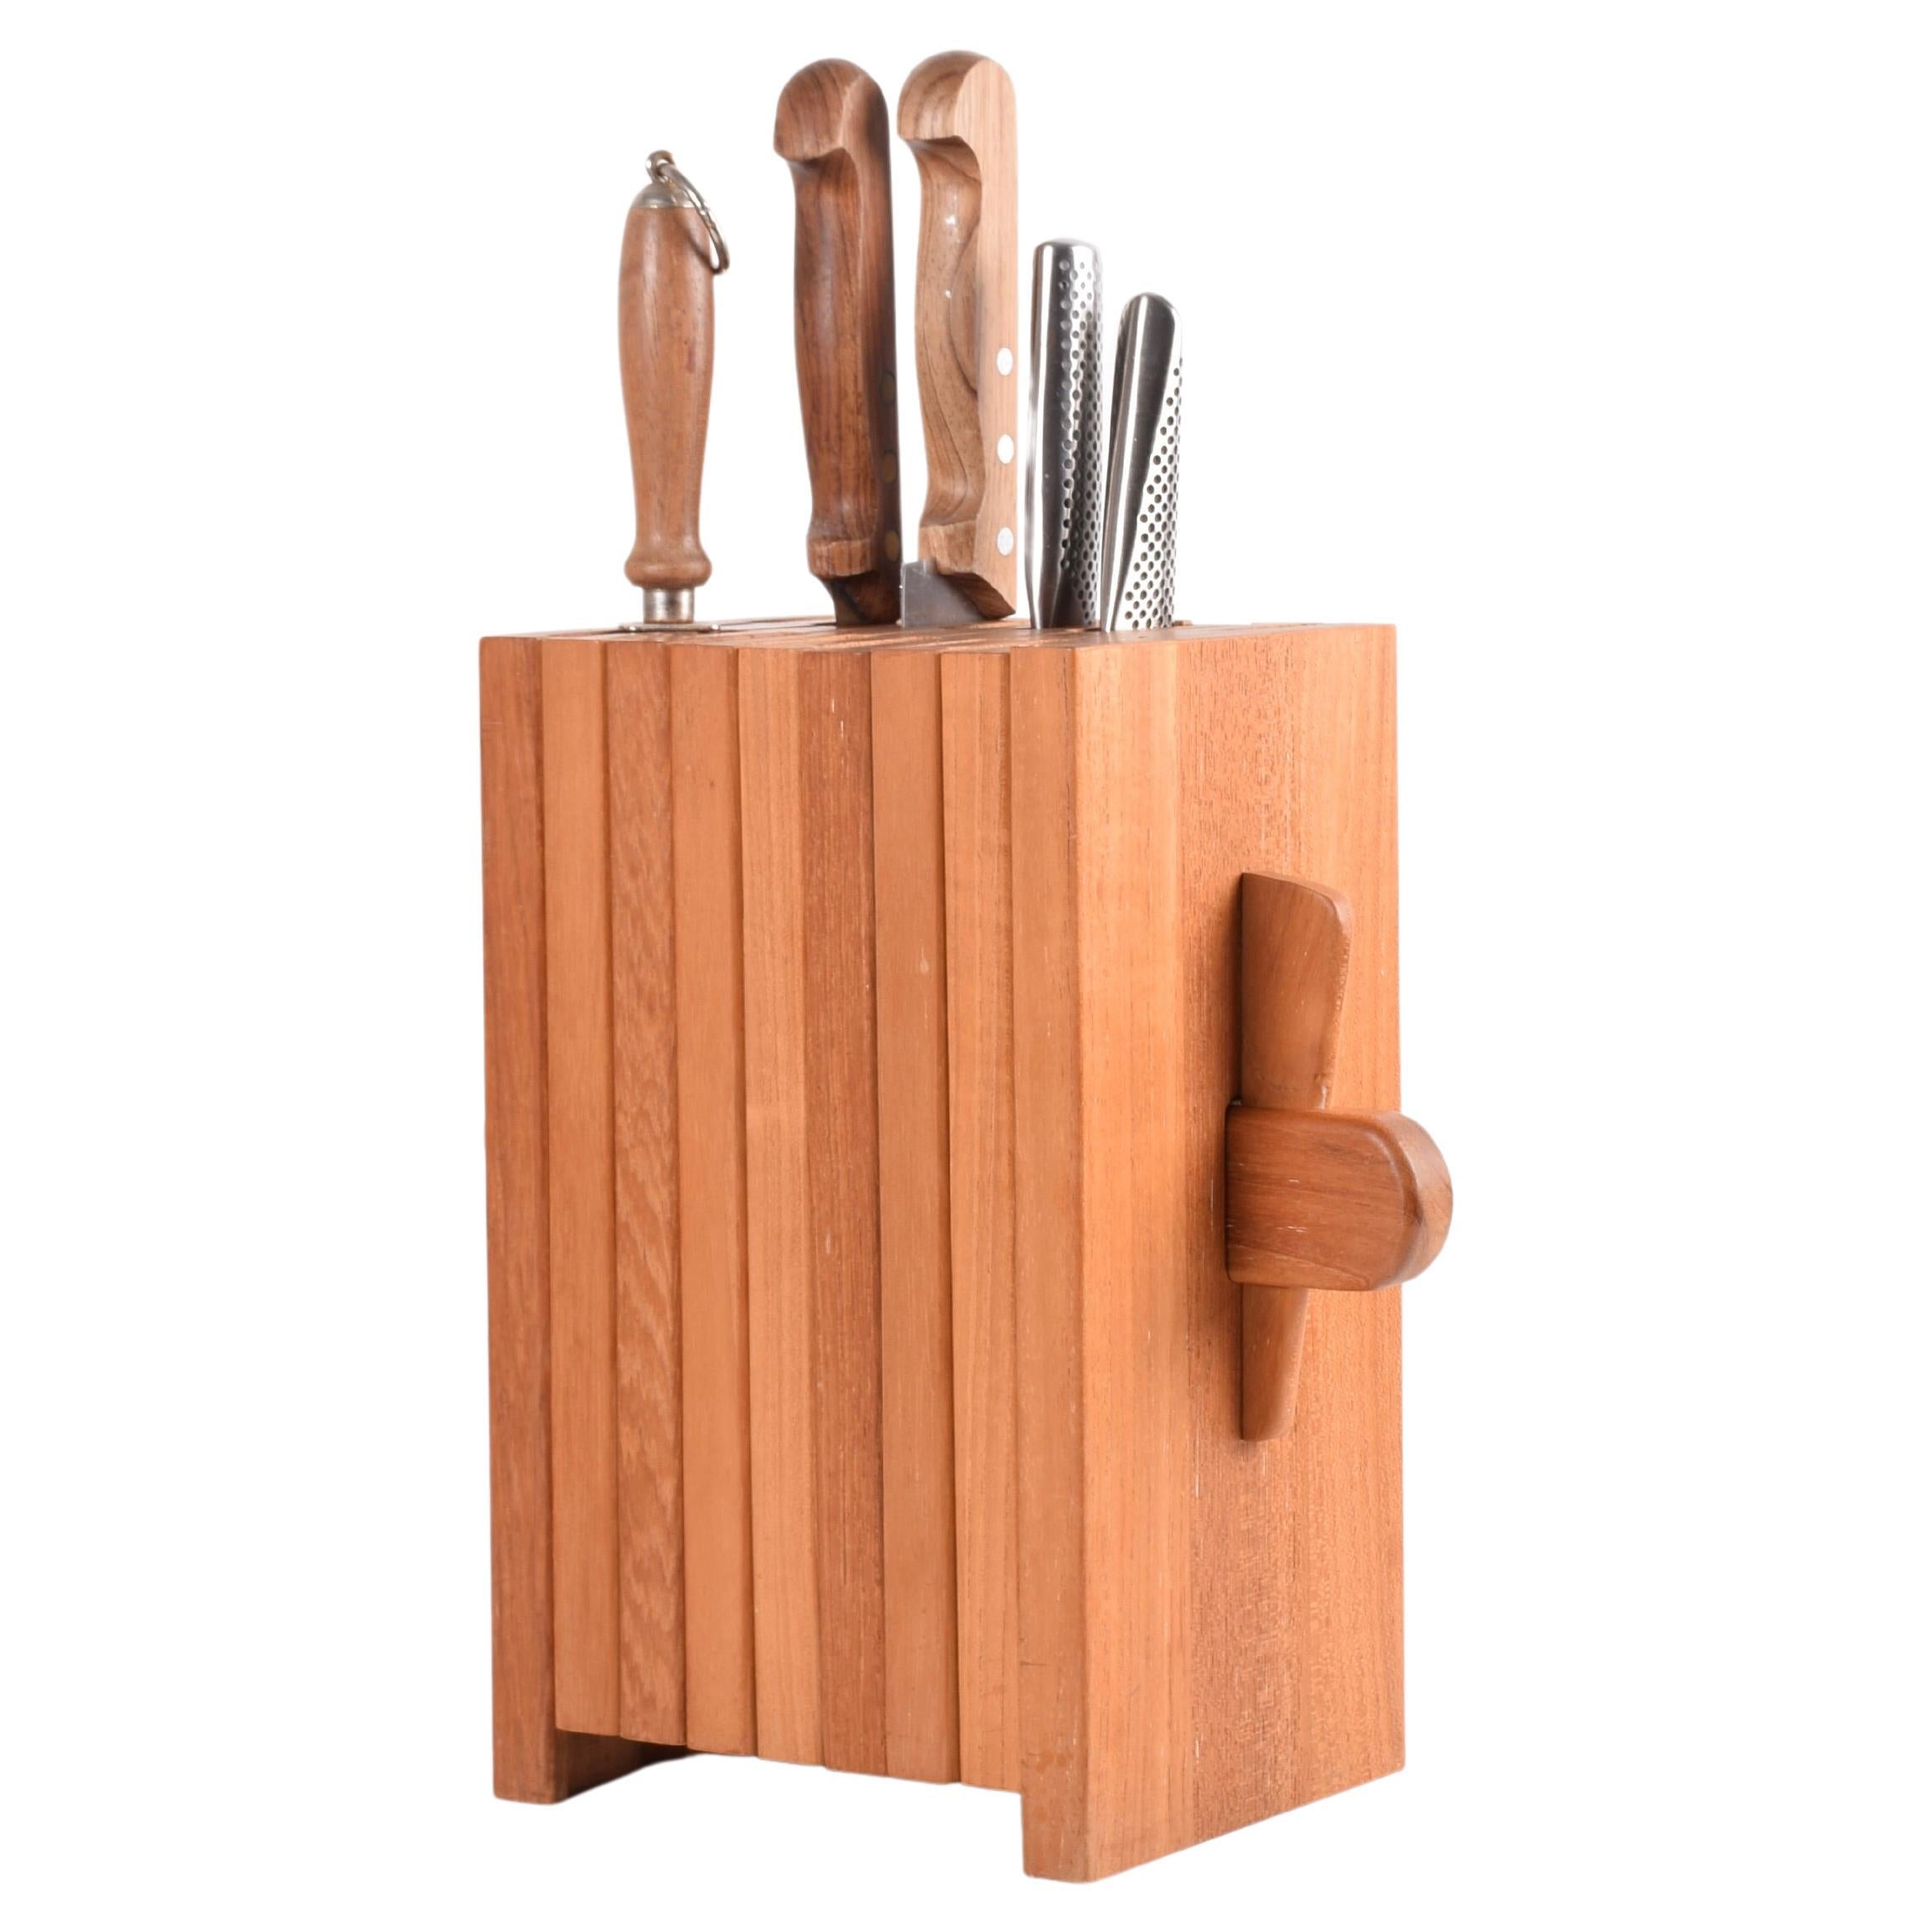 Rare to find knife storage block from the Danish wood manufacturer 